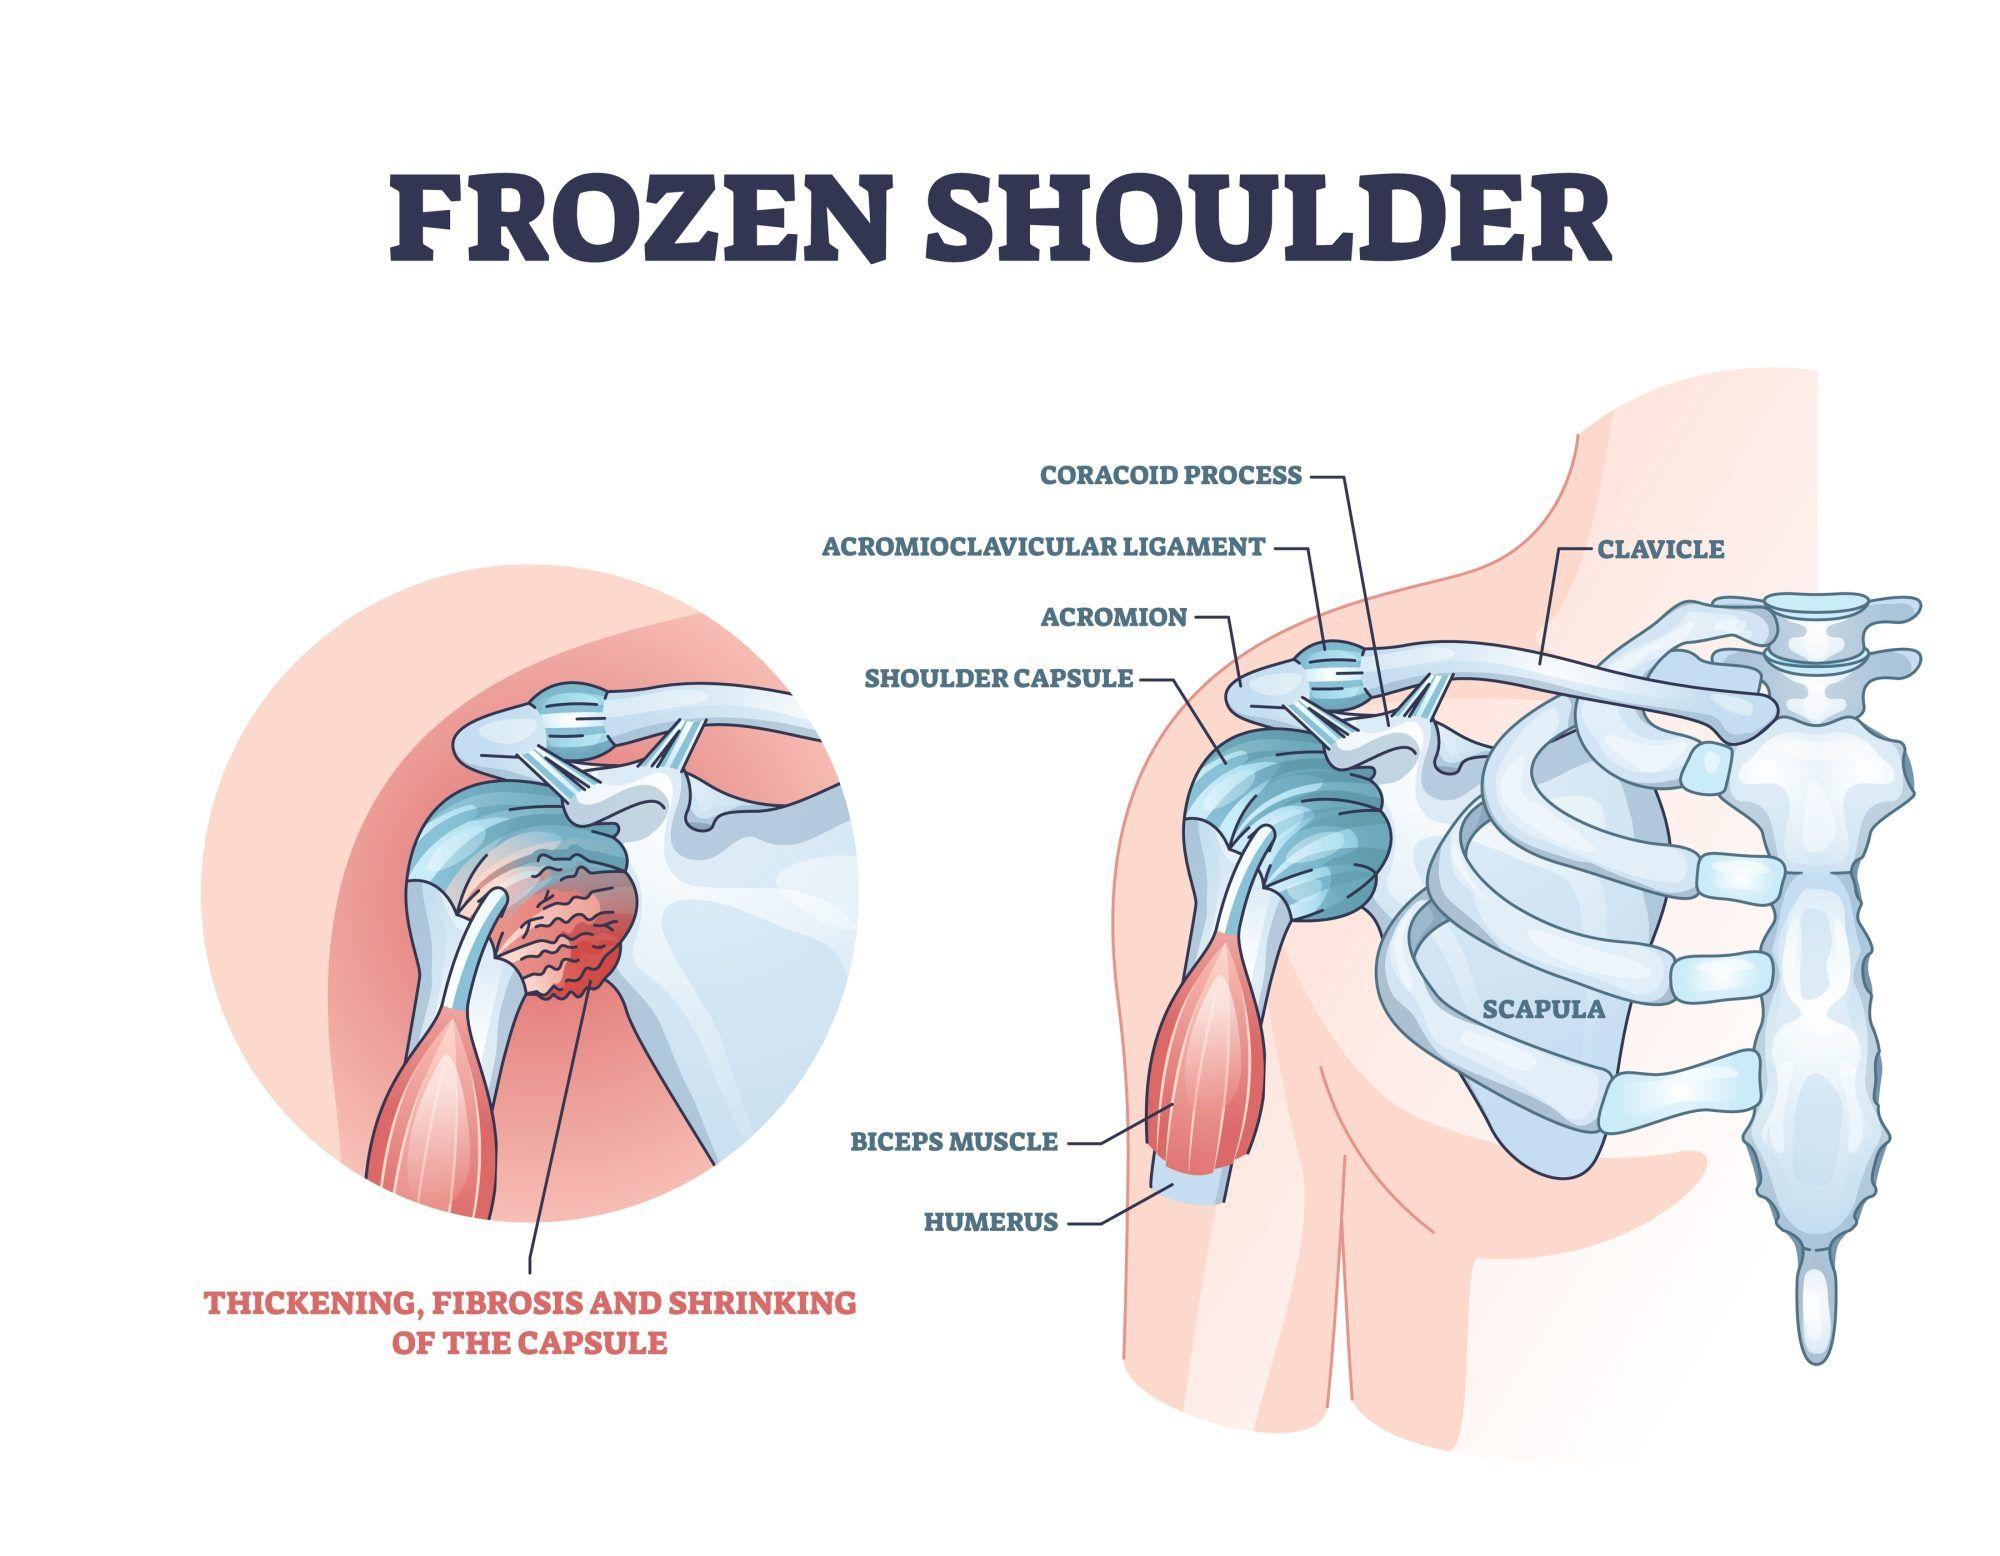 Anatomy diagram depicting the thickening, fibrosis, and shrinking of the shoulder capsule due to frozen shoulder.